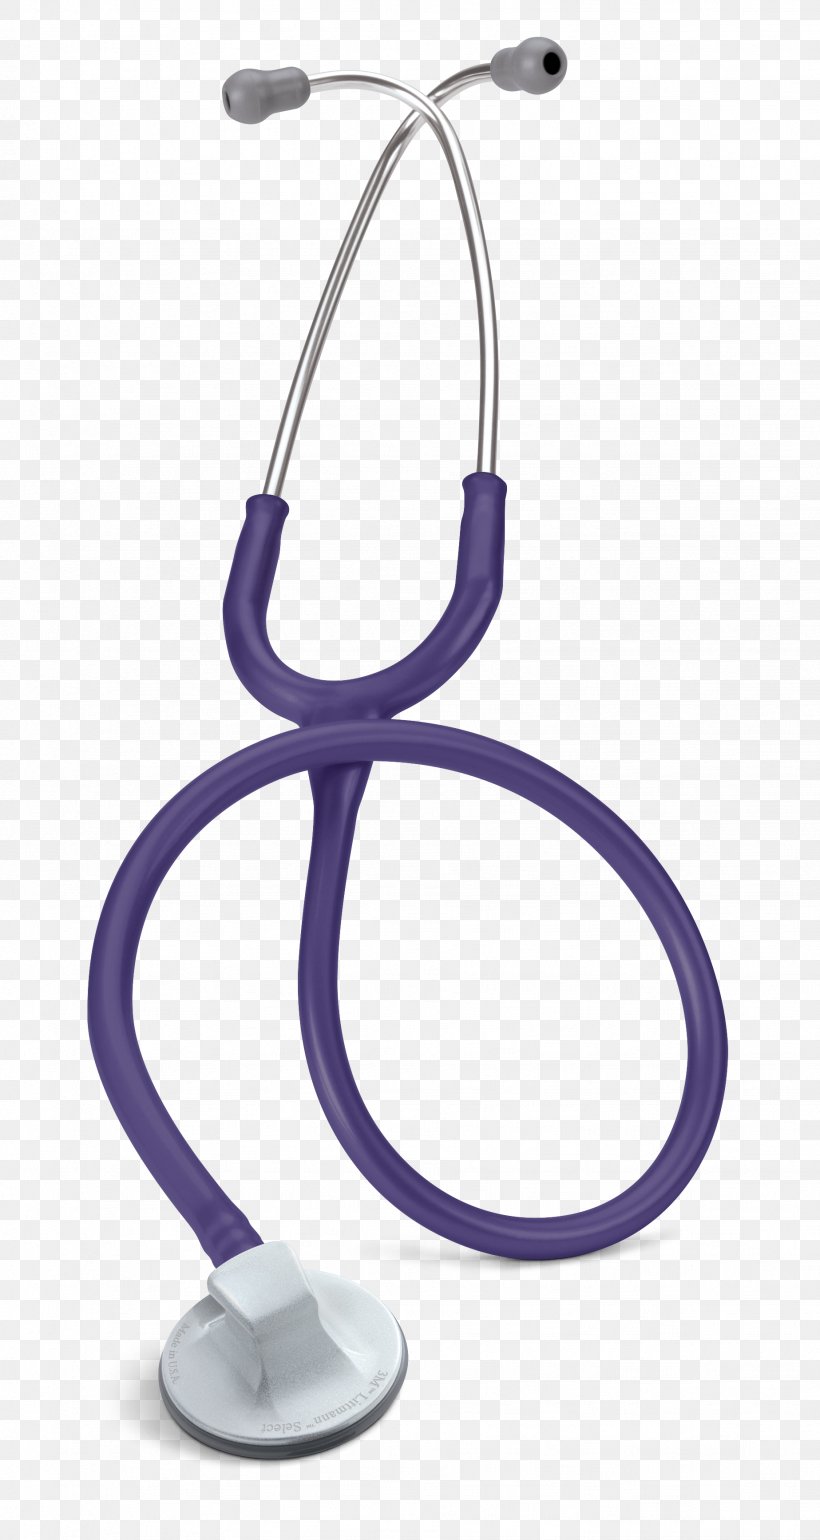 Stethoscope Pediatrics Physical Examination Cardiology Medicine, PNG, 1847x3469px, 3m Singapore, Stethoscope, Binaural Recording, Blood Pressure, Cardiology Download Free